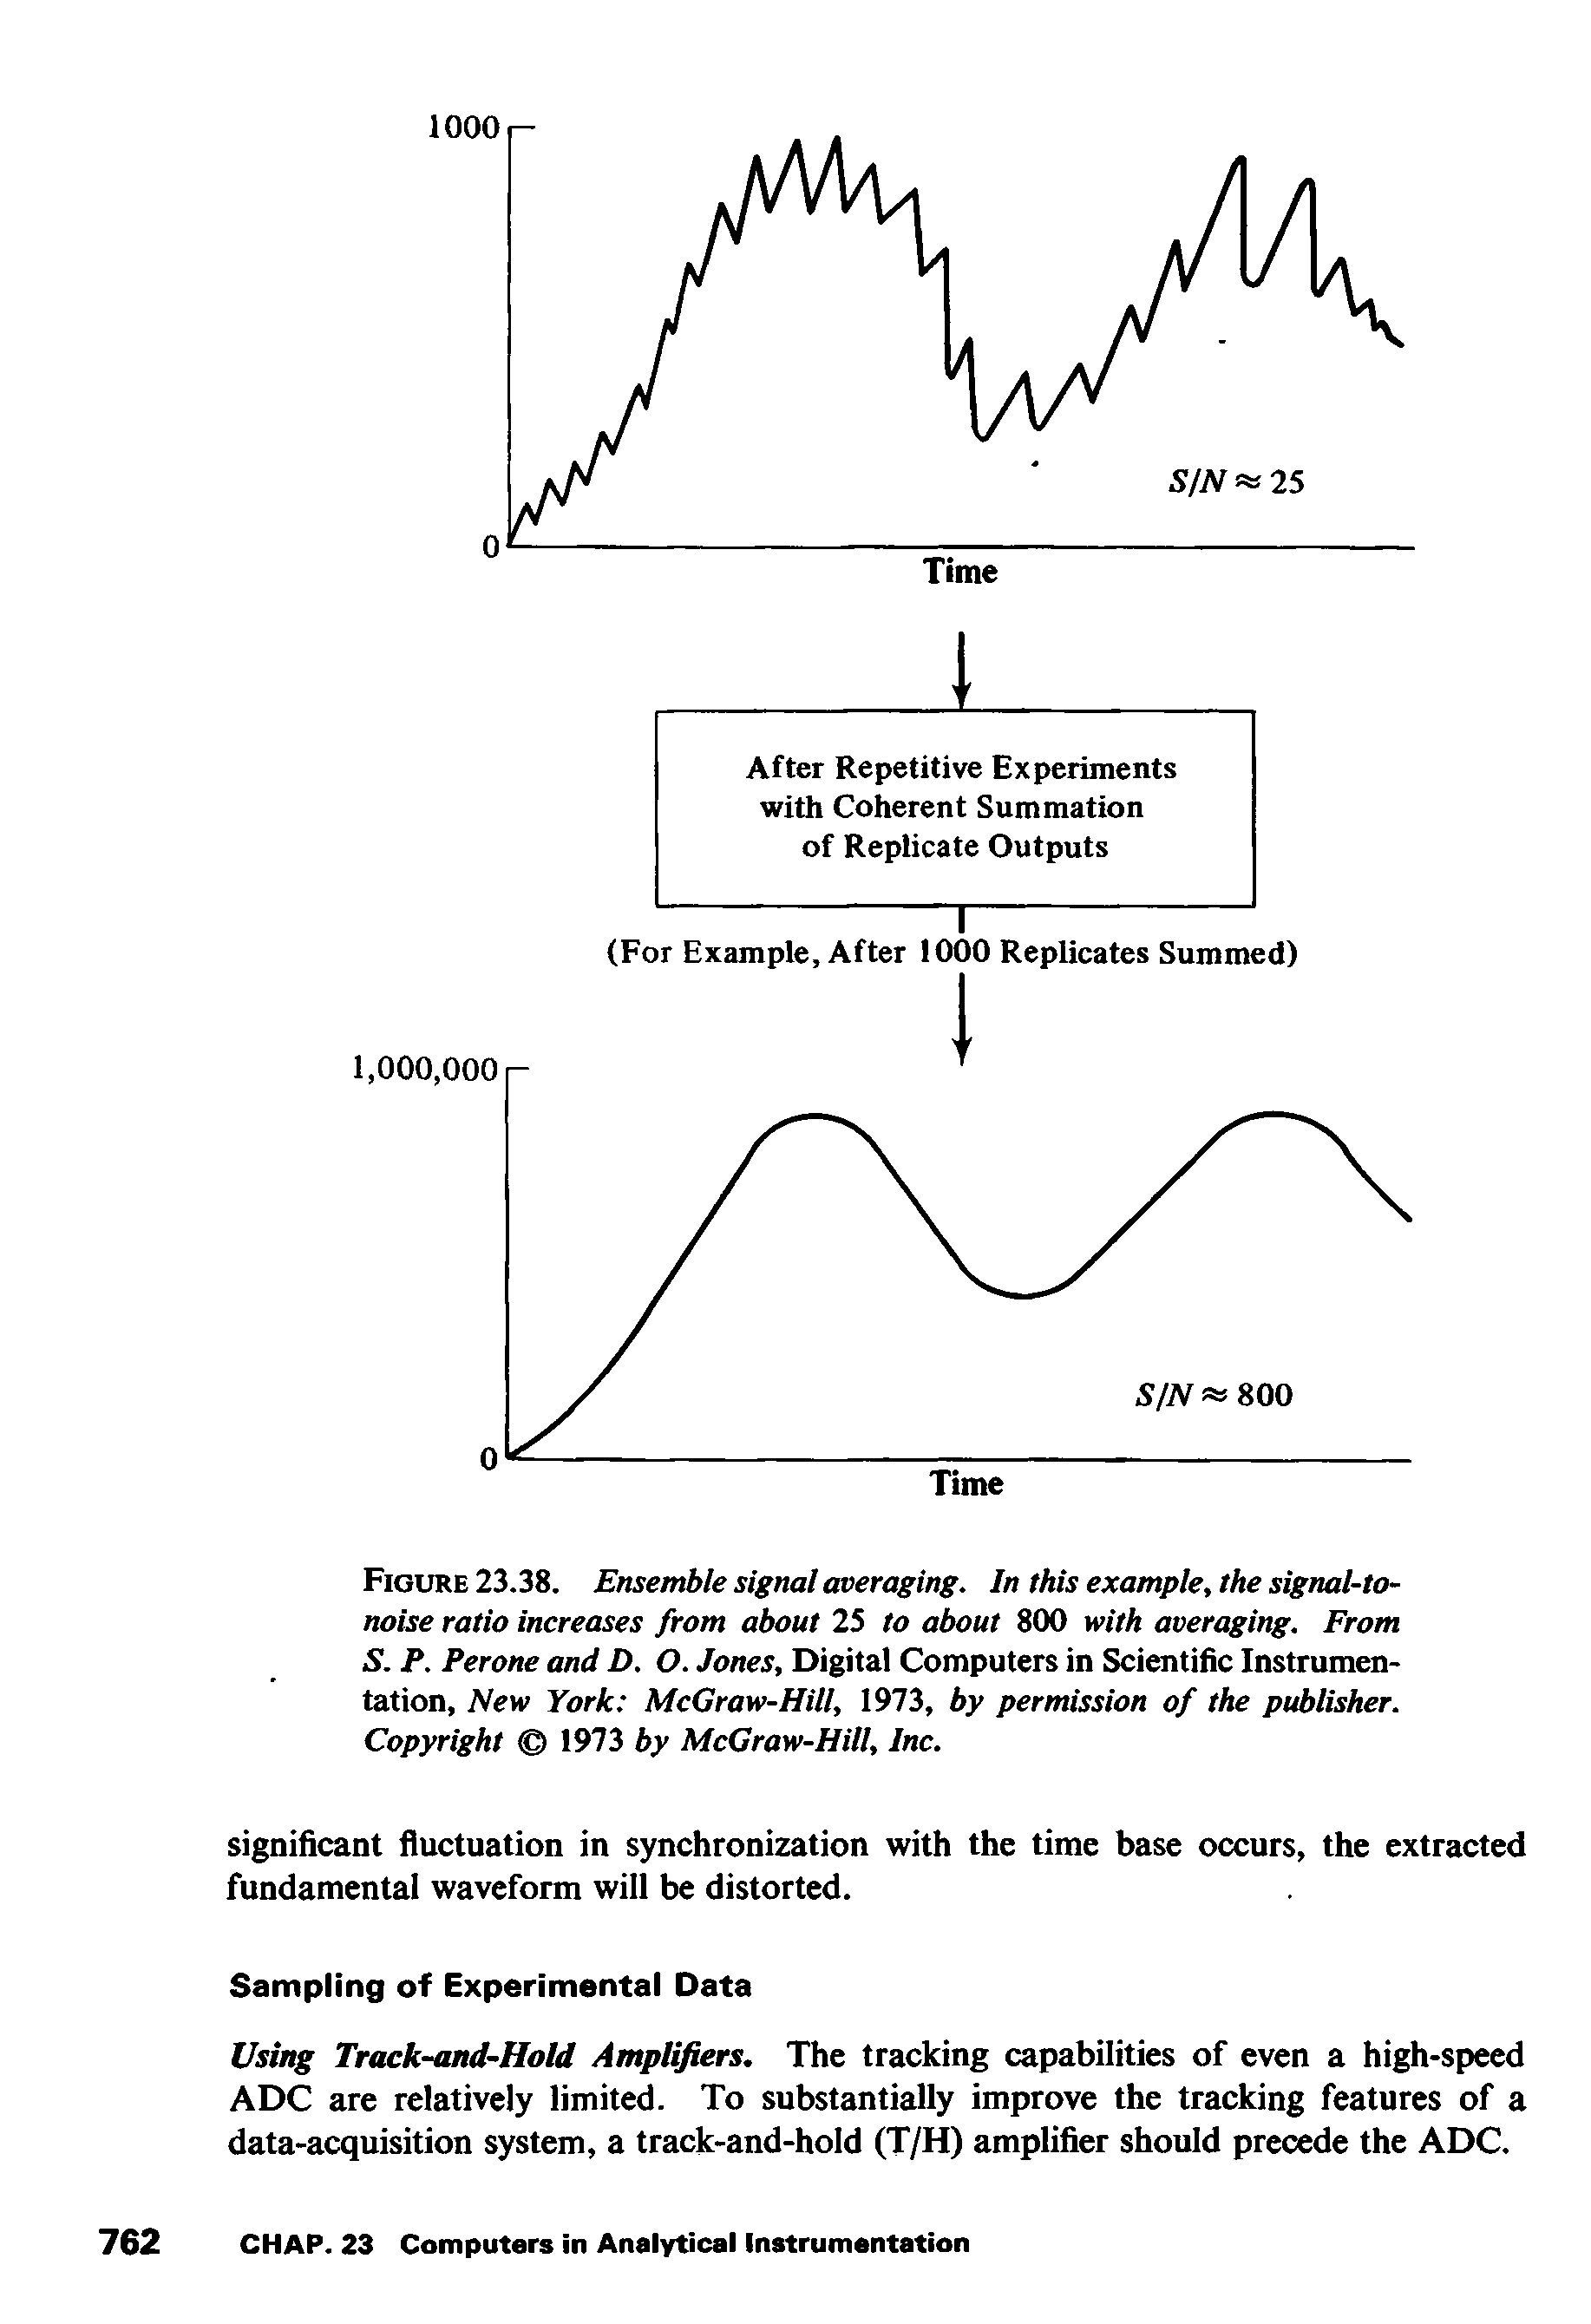 Figure 23.38. Ensemble signal averaging. In this example, the signal-to-noise ratio increases from about 25 to about 800 with averaging. From S. P. Perone and D. O. Jones, Digital Computers in Scientific Instrumentation, New York McGraw-Hill, 1973, by permission of the publisher. Copyright 9Ti by McGraw-Hill, Inc.